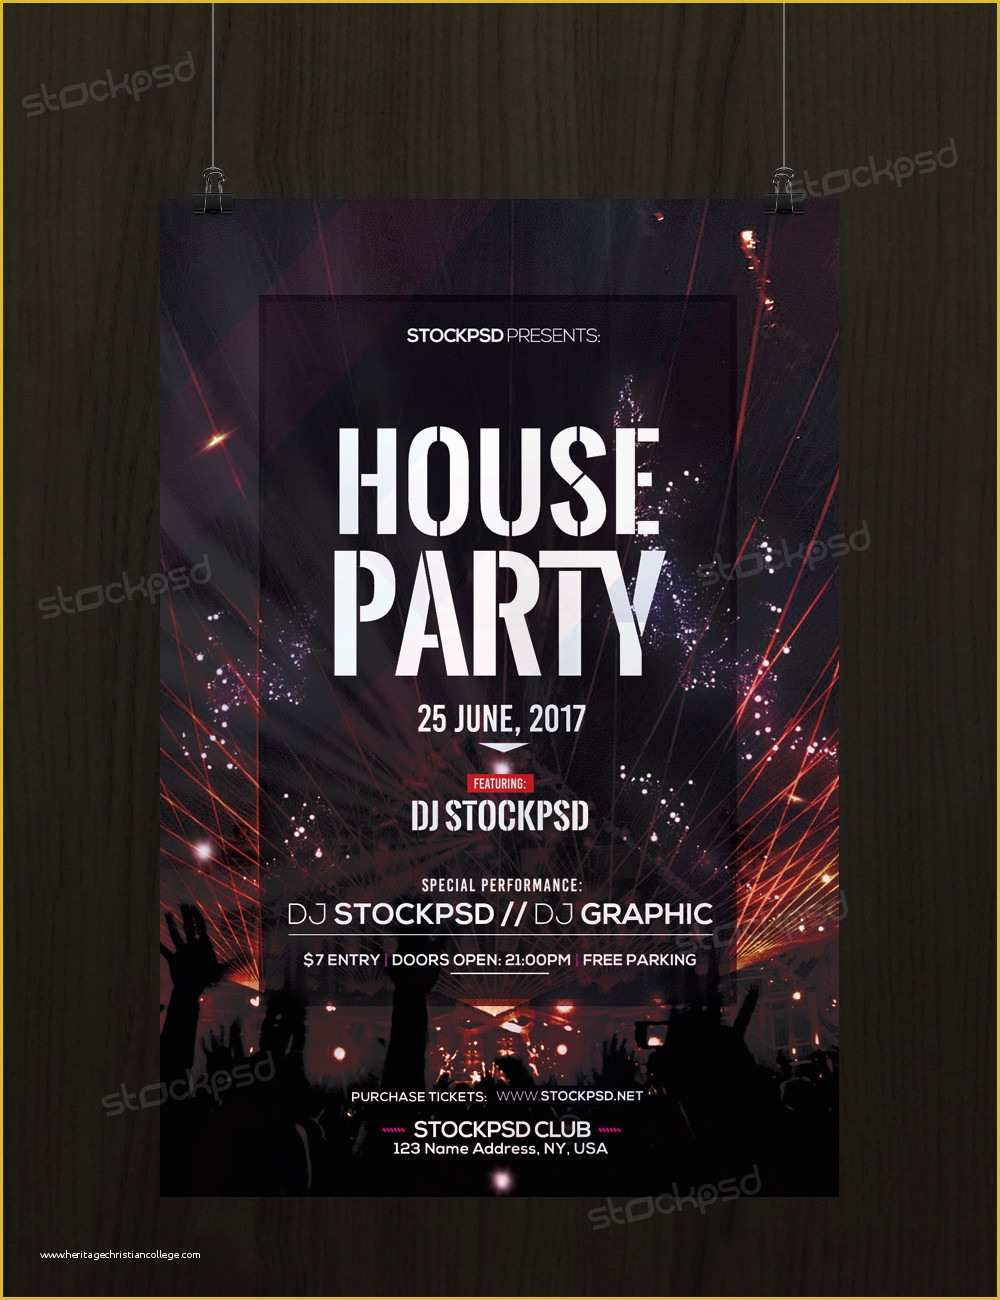 Psd Templates Free Download Of House Party Download Free Psd Flyer Template Stockpsd